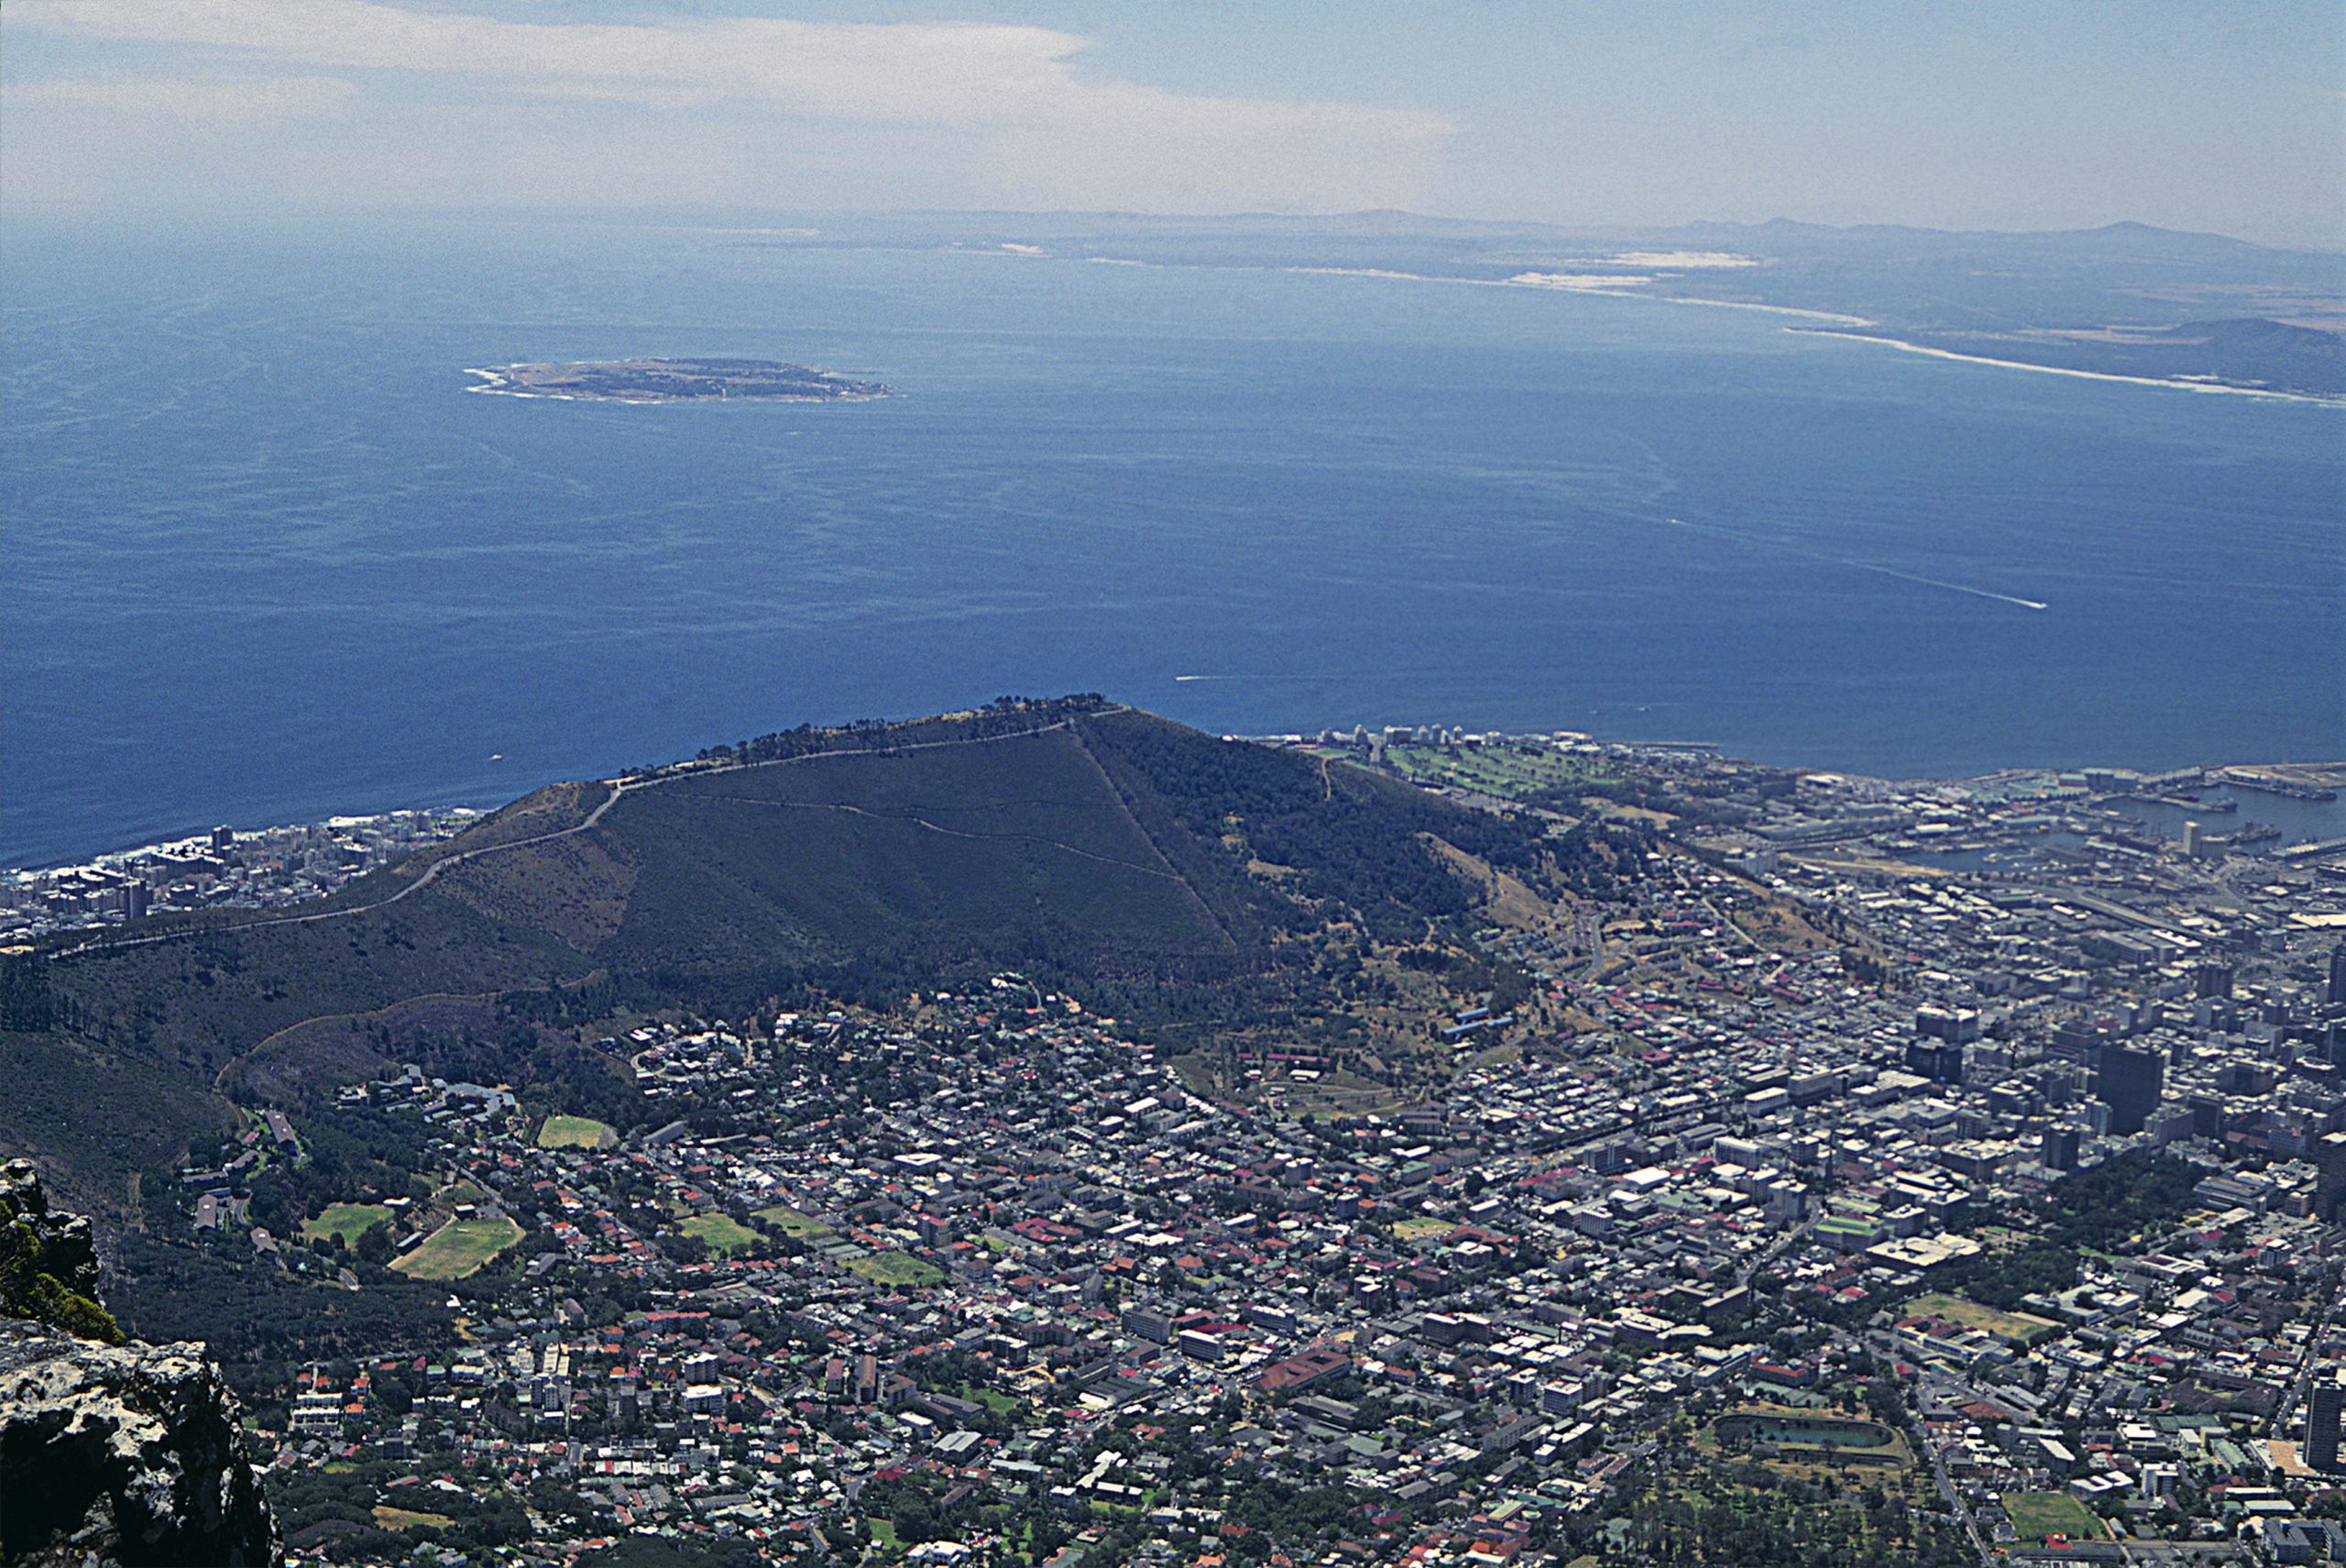 Aerial view of a coastal city with dense buildings leading up to a green hillside and an expansive view of the ocean in the background.